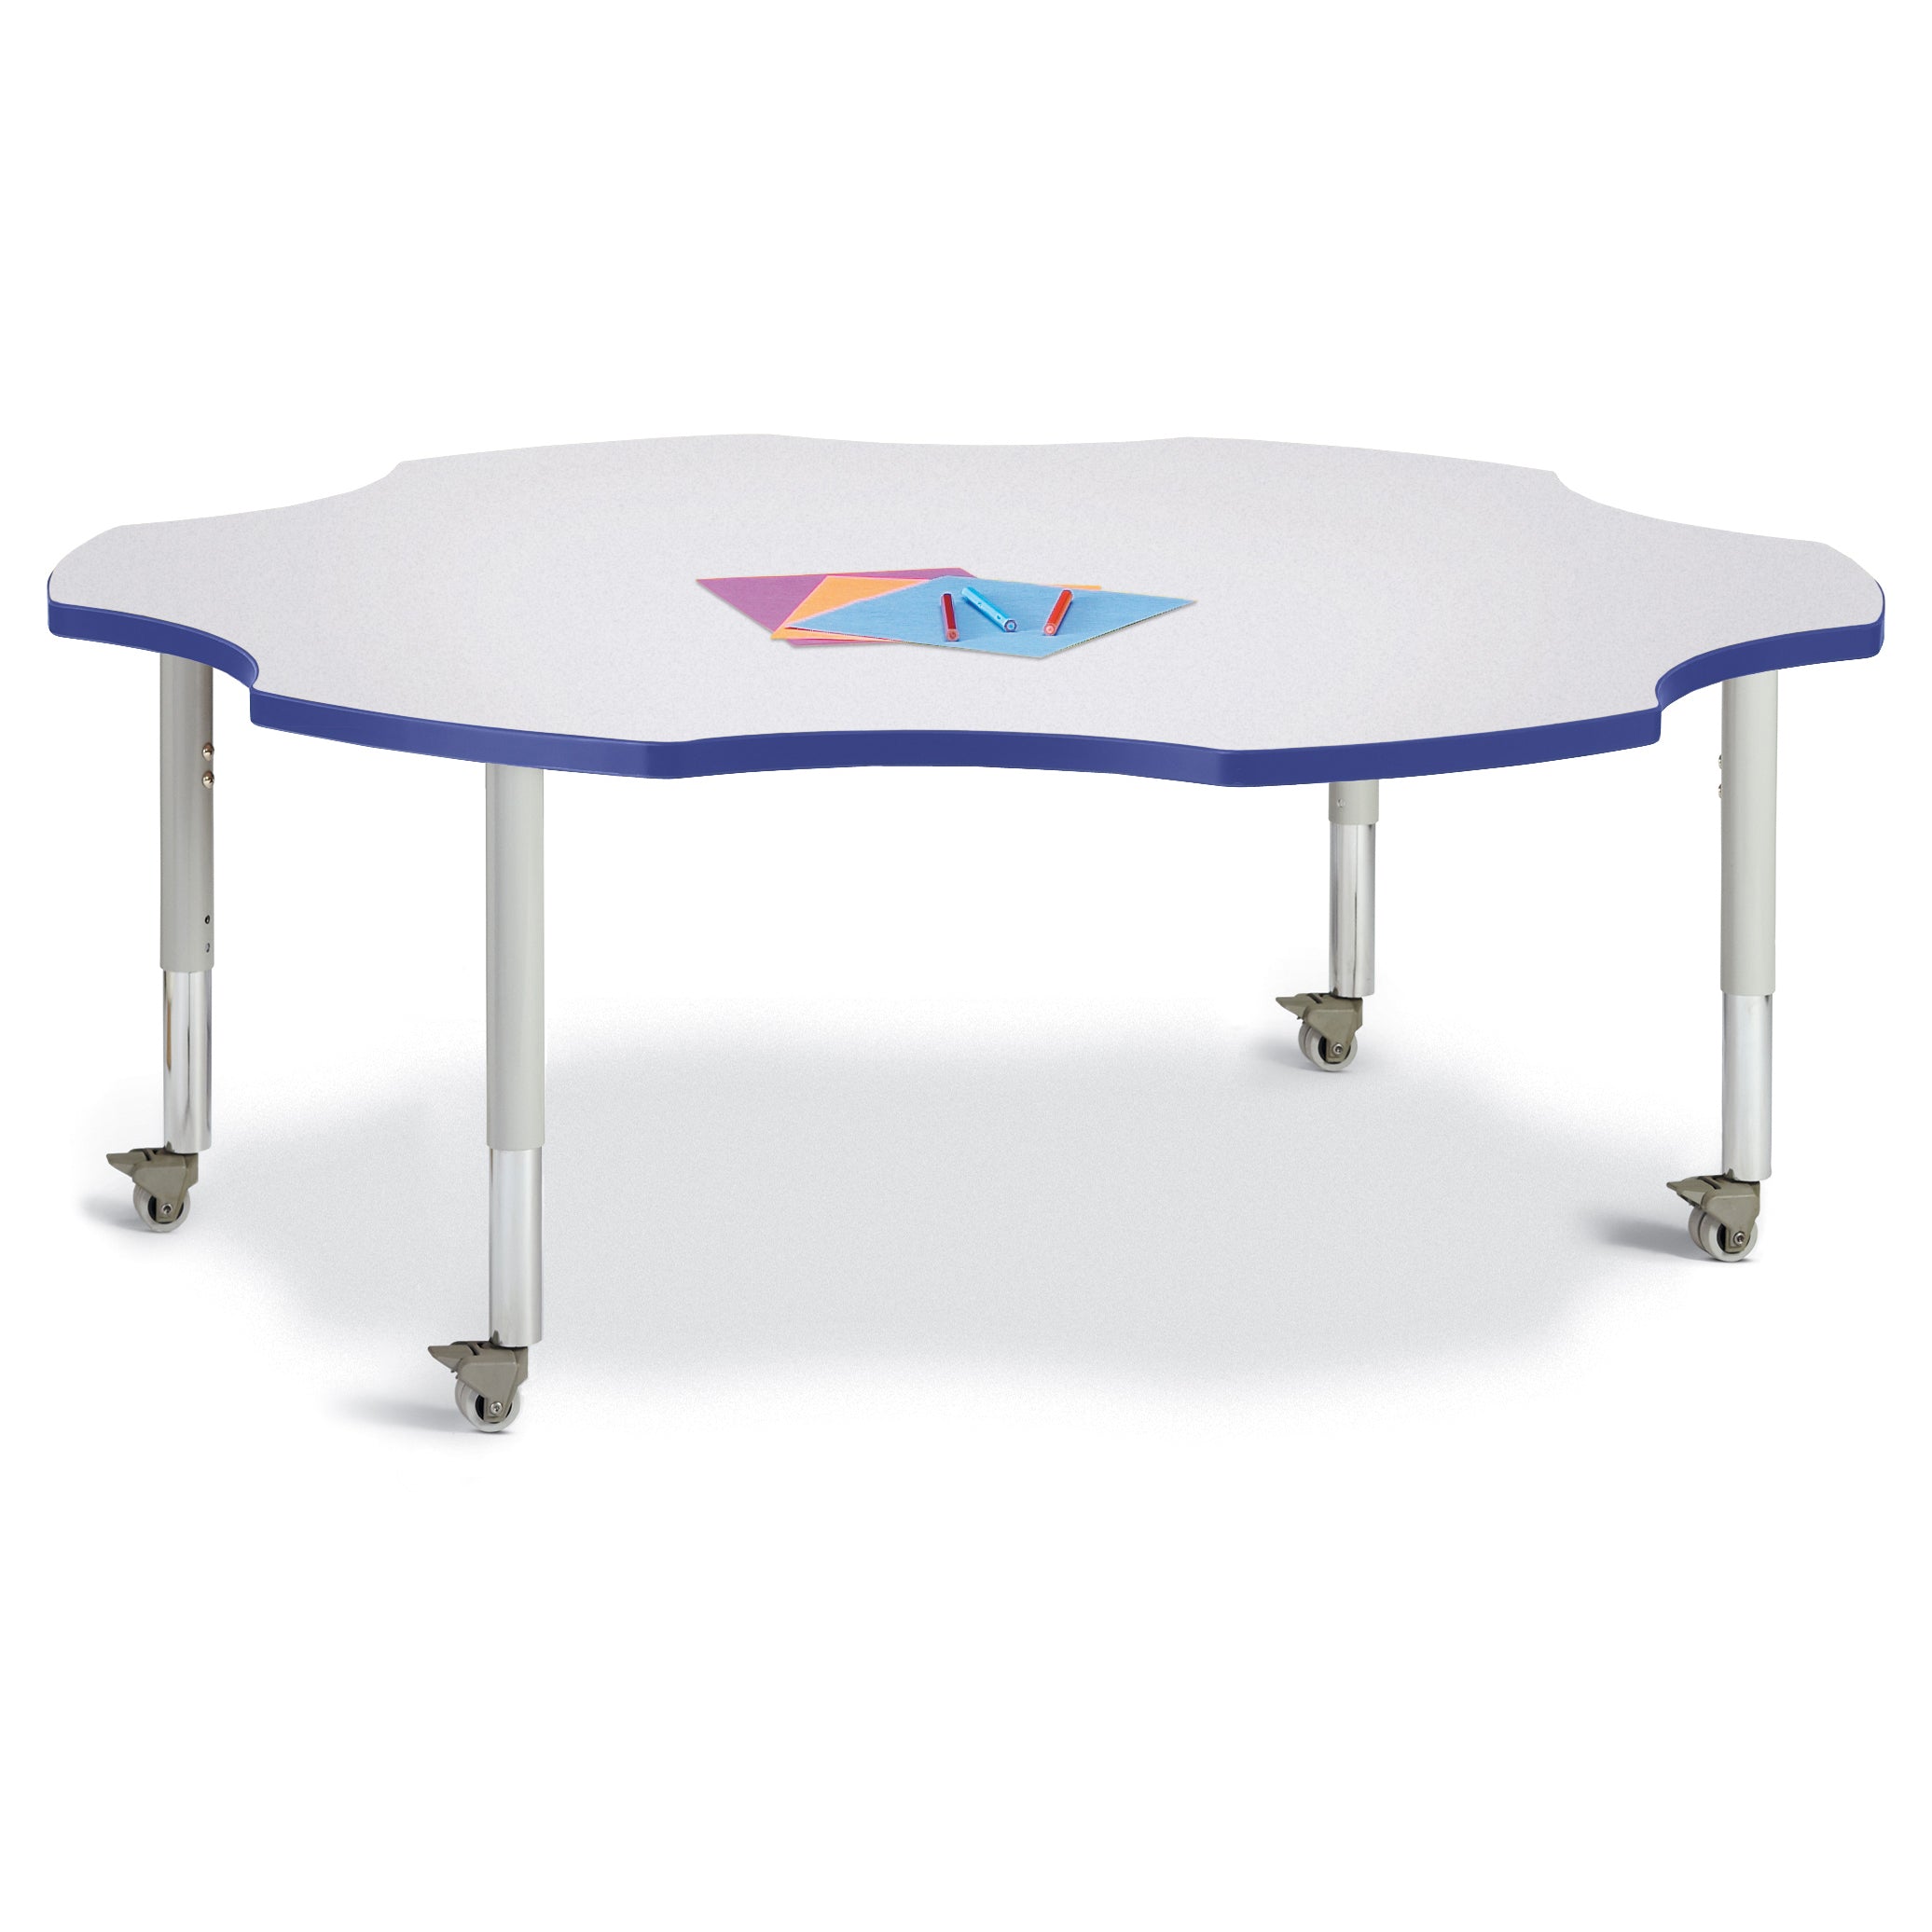 6458JCM003, Berries Six Leaf Activity Table - 60", Mobile - Freckled Gray/Blue/Gray